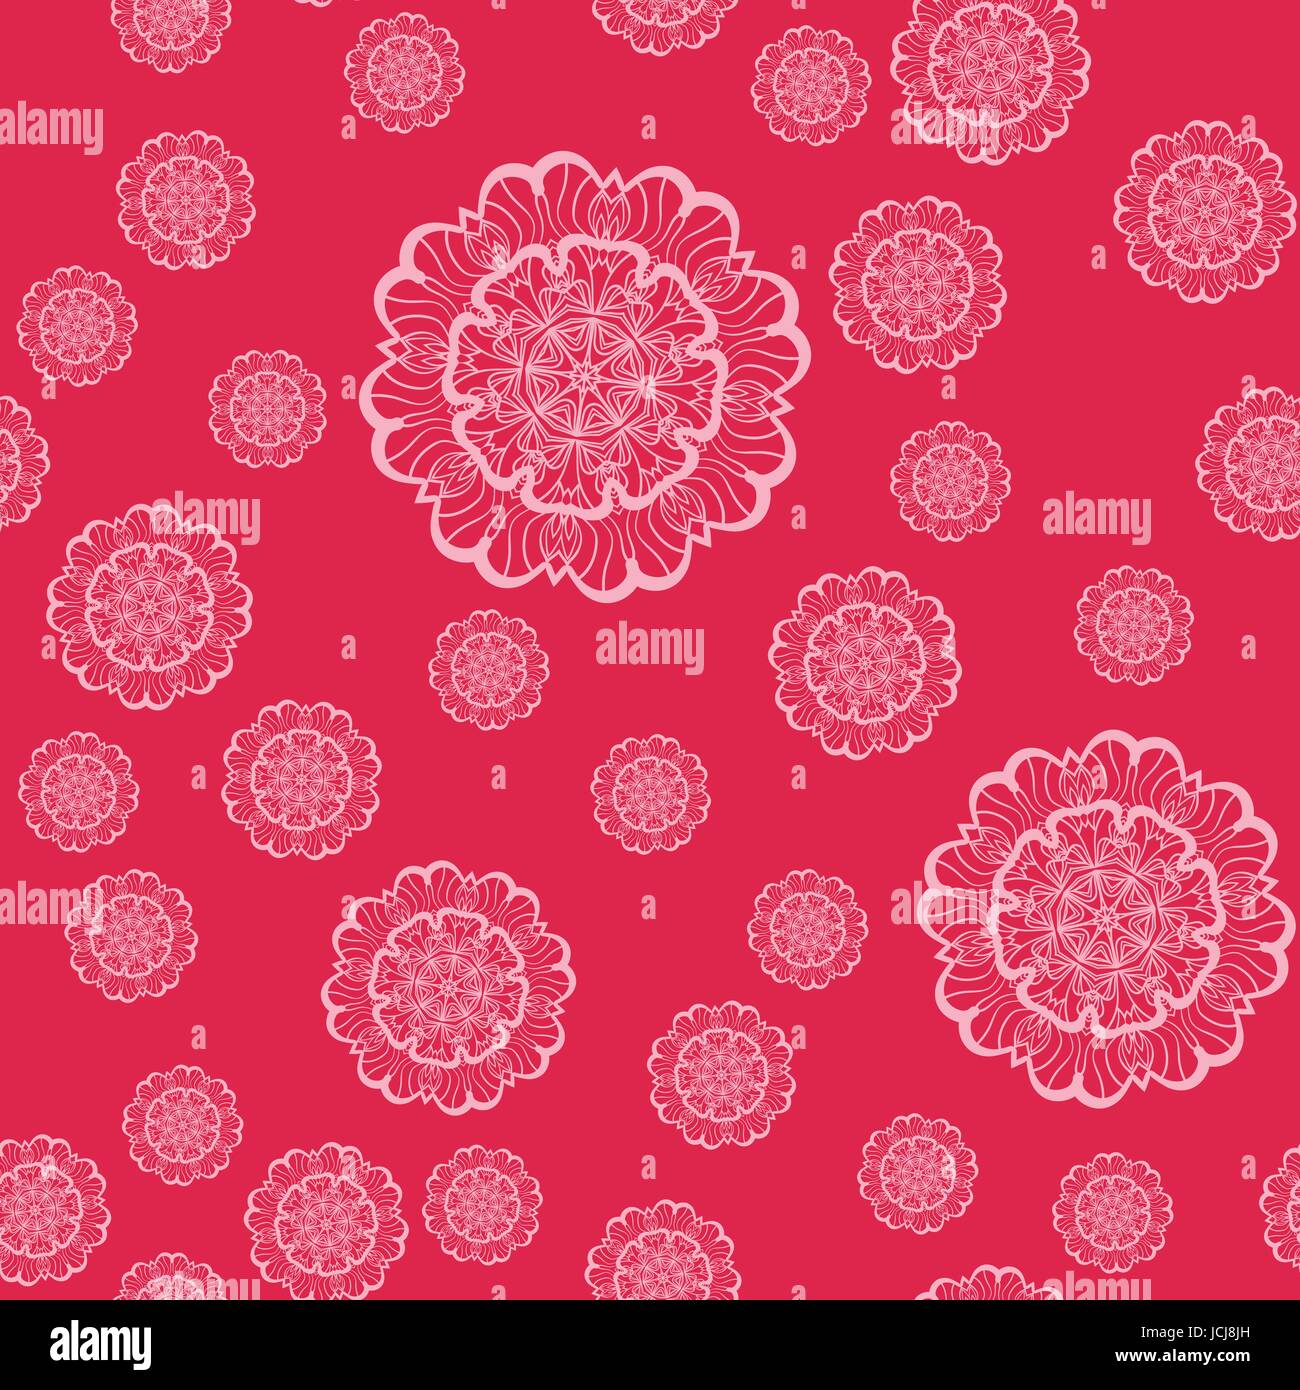 Pink Lace Flower Background By Ayme Designs